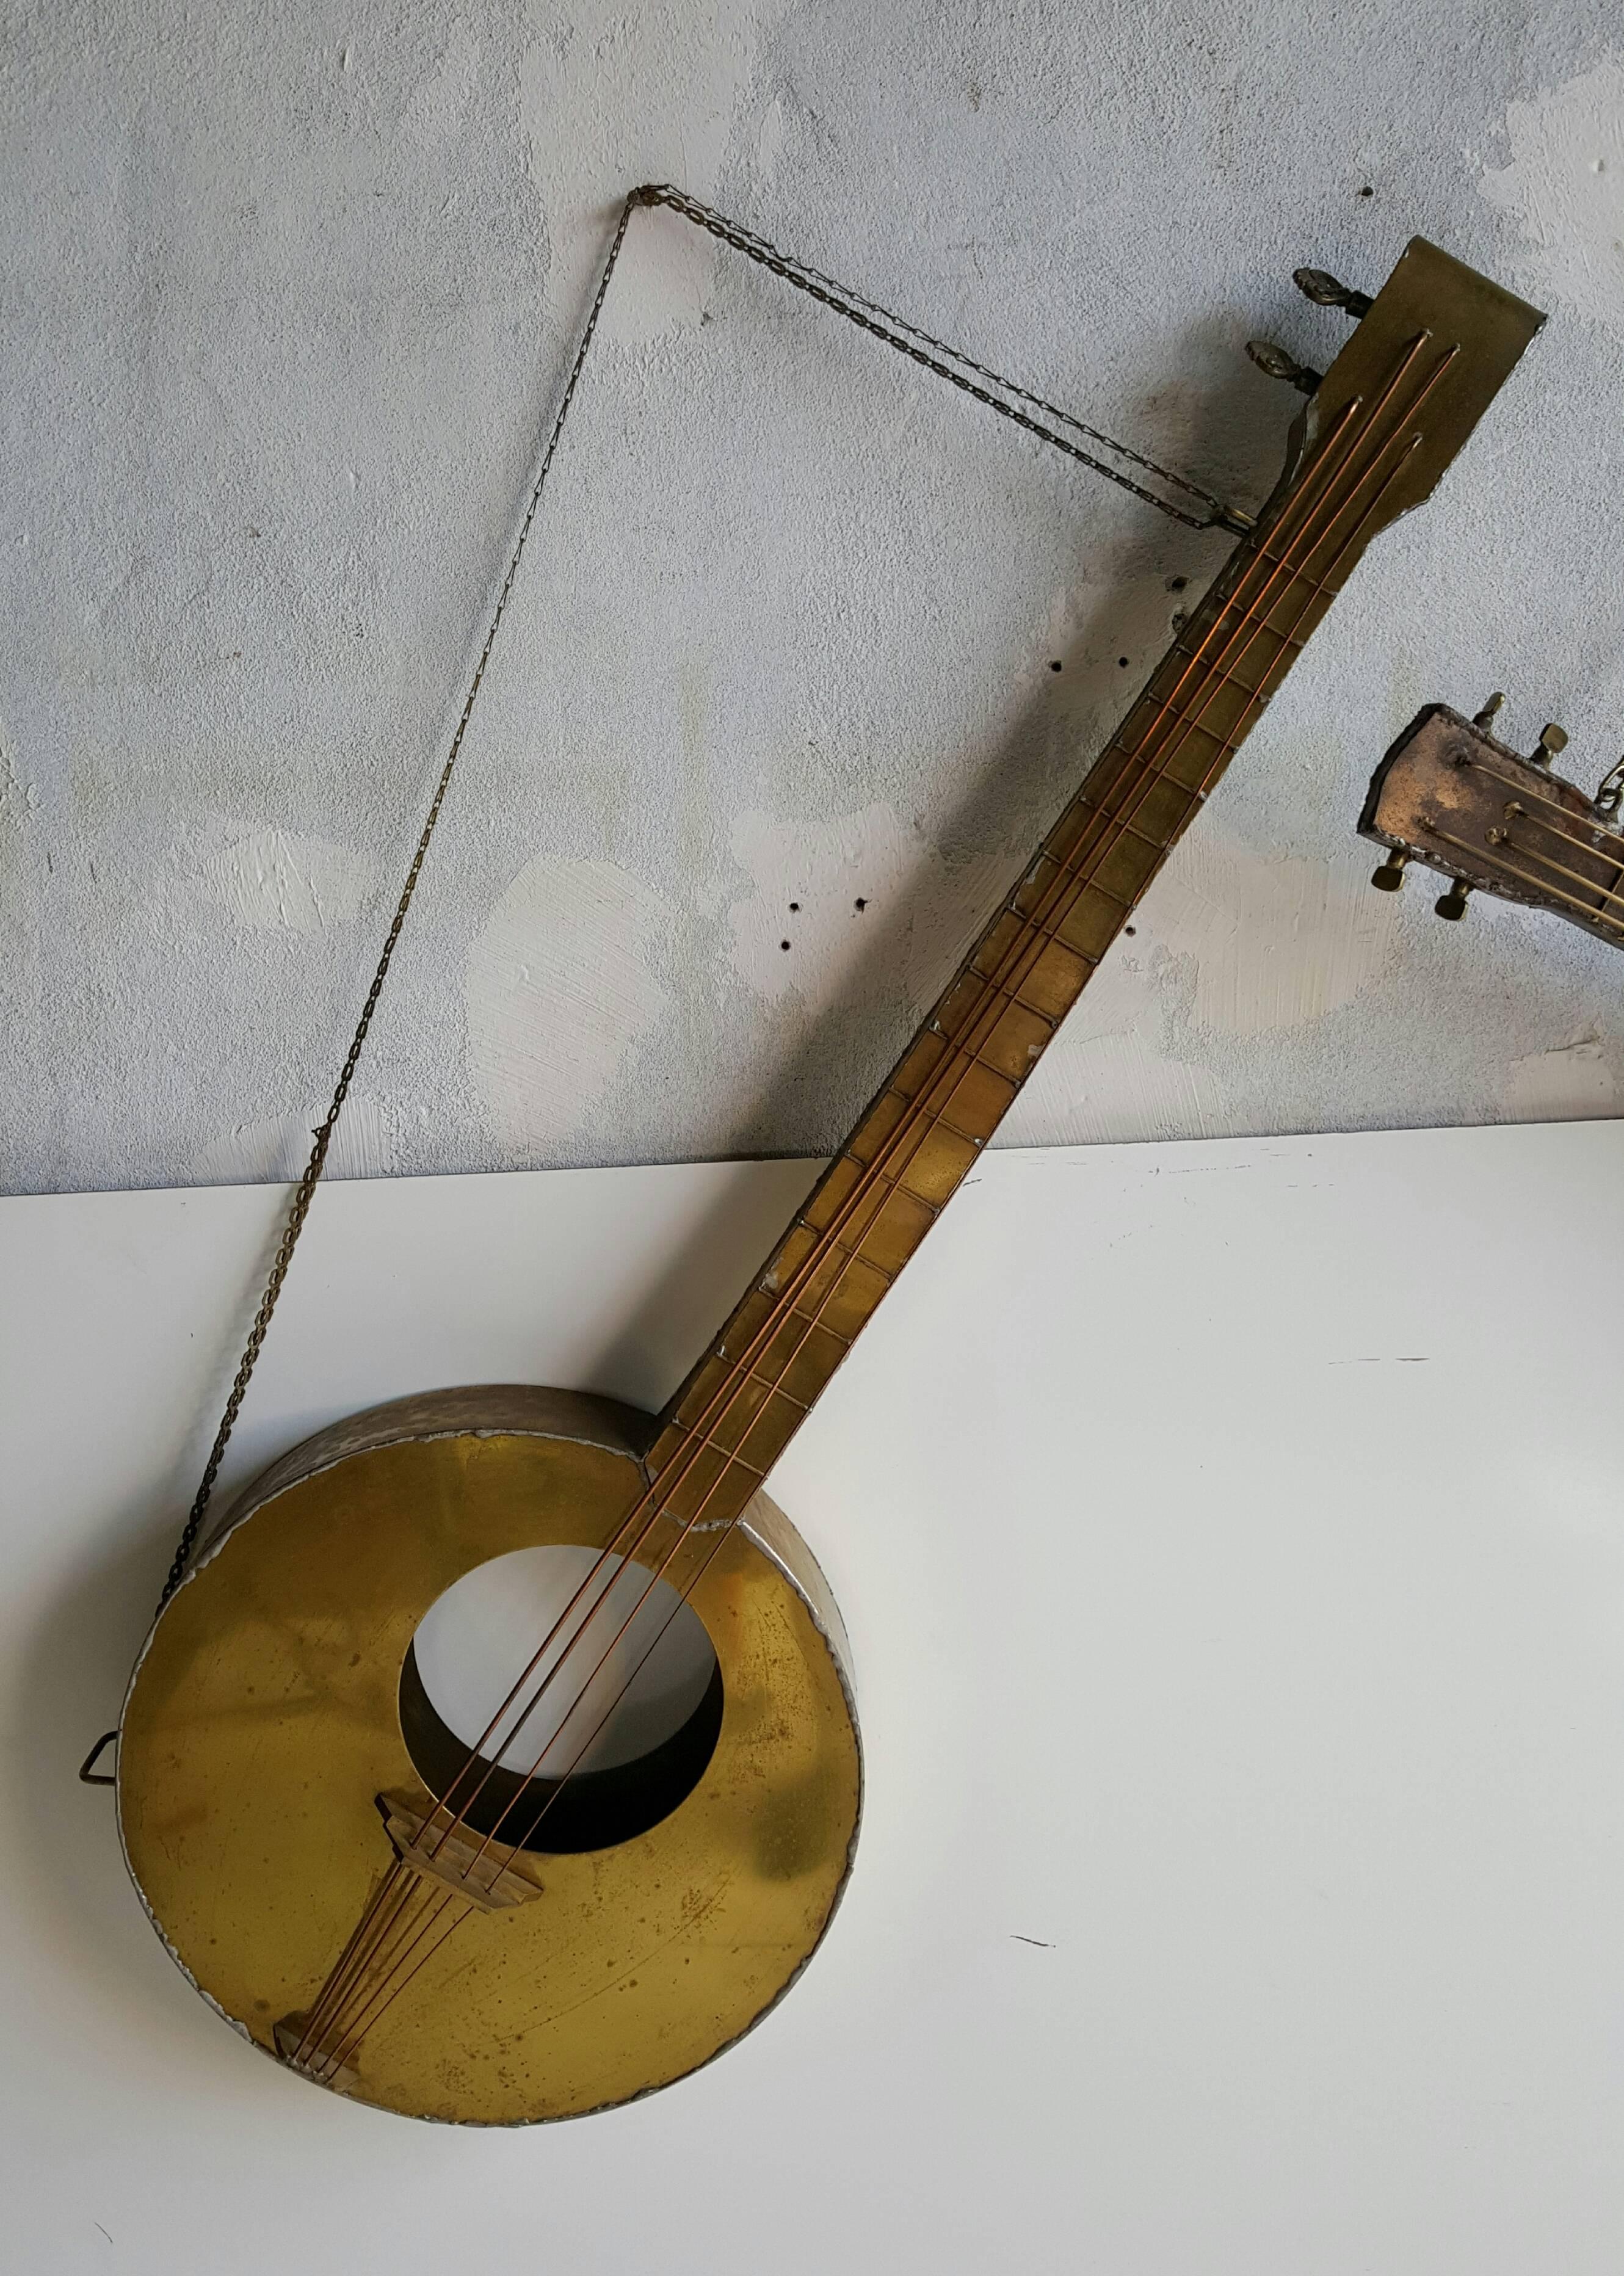 Modernist Folk Art metal musical instrument sculptures, depicting 'Picasso-like guitars,, Very well executed, hand welded, wonderful form and patina, large guitar or banjo measures 45